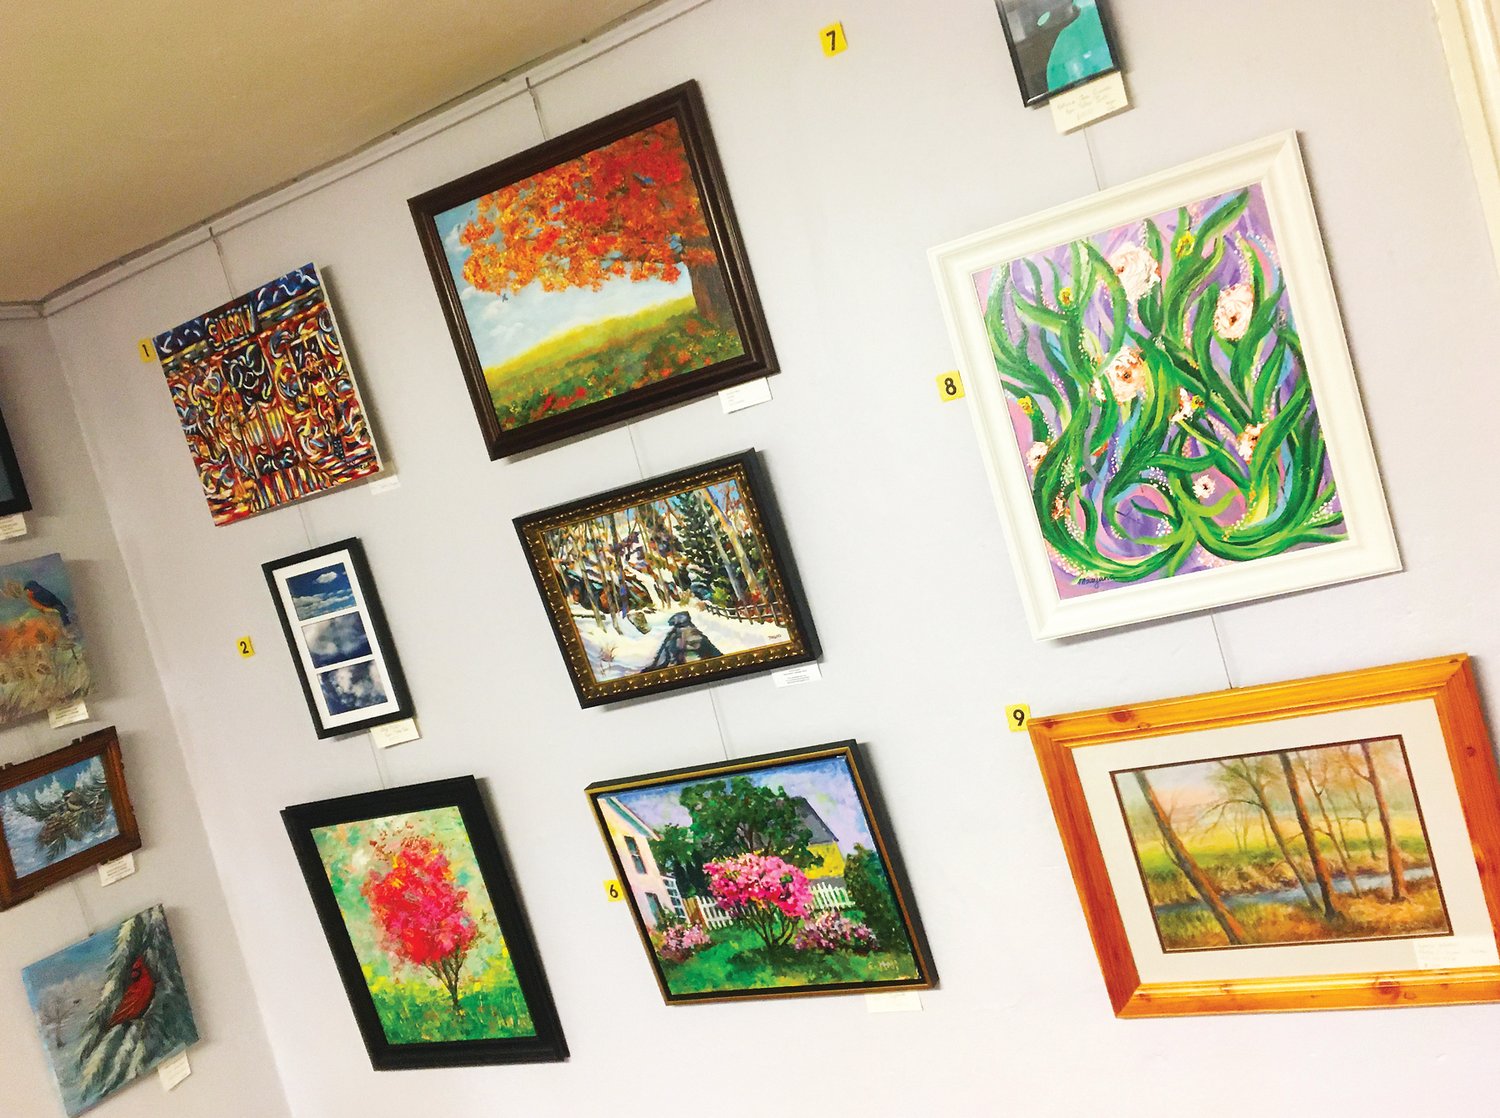 Gathering Art Gallery and Boutique showcases works by local artists.